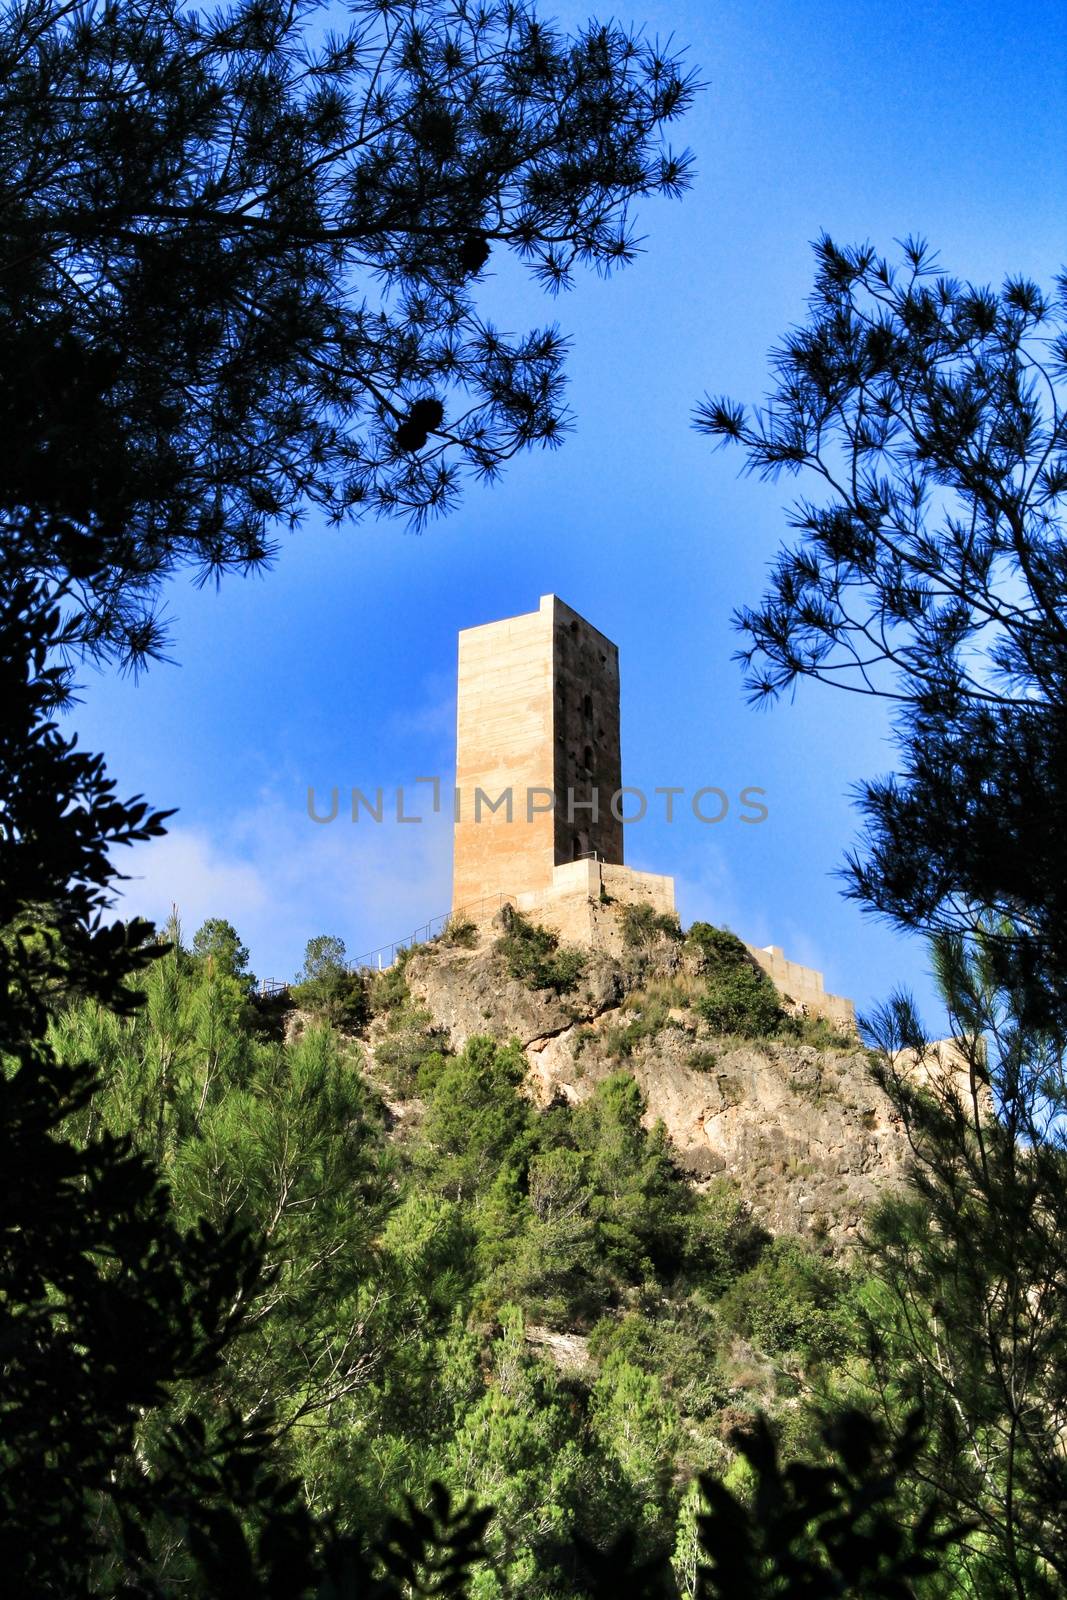 Carricola vigia tower surrounded by native vegetation by soniabonet